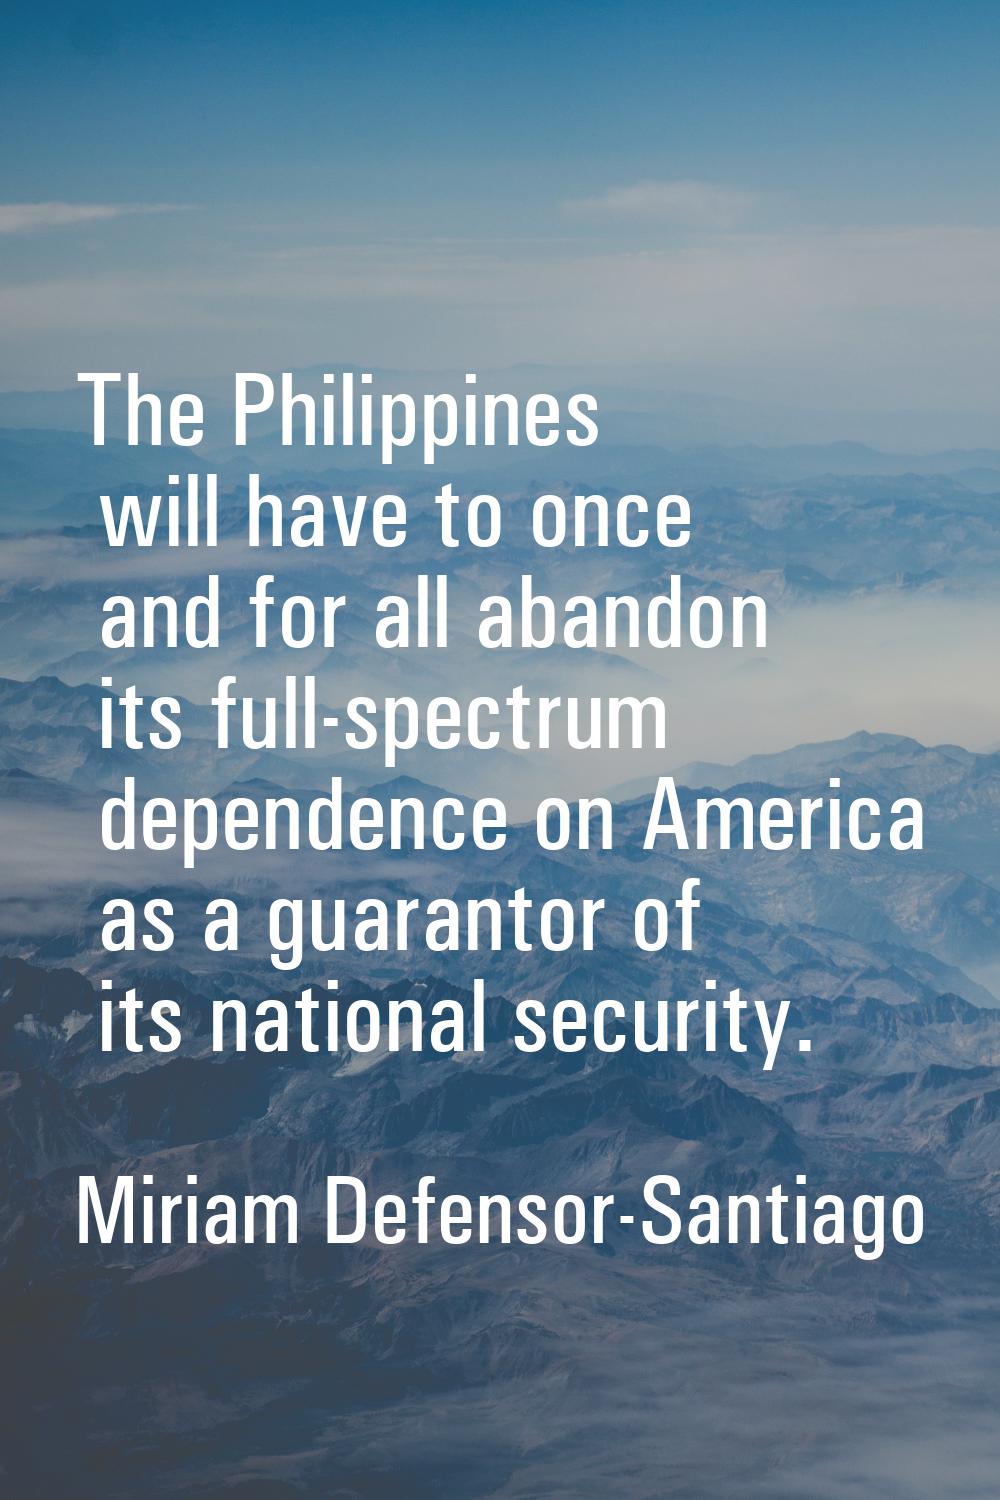 The Philippines will have to once and for all abandon its full-spectrum dependence on America as a 